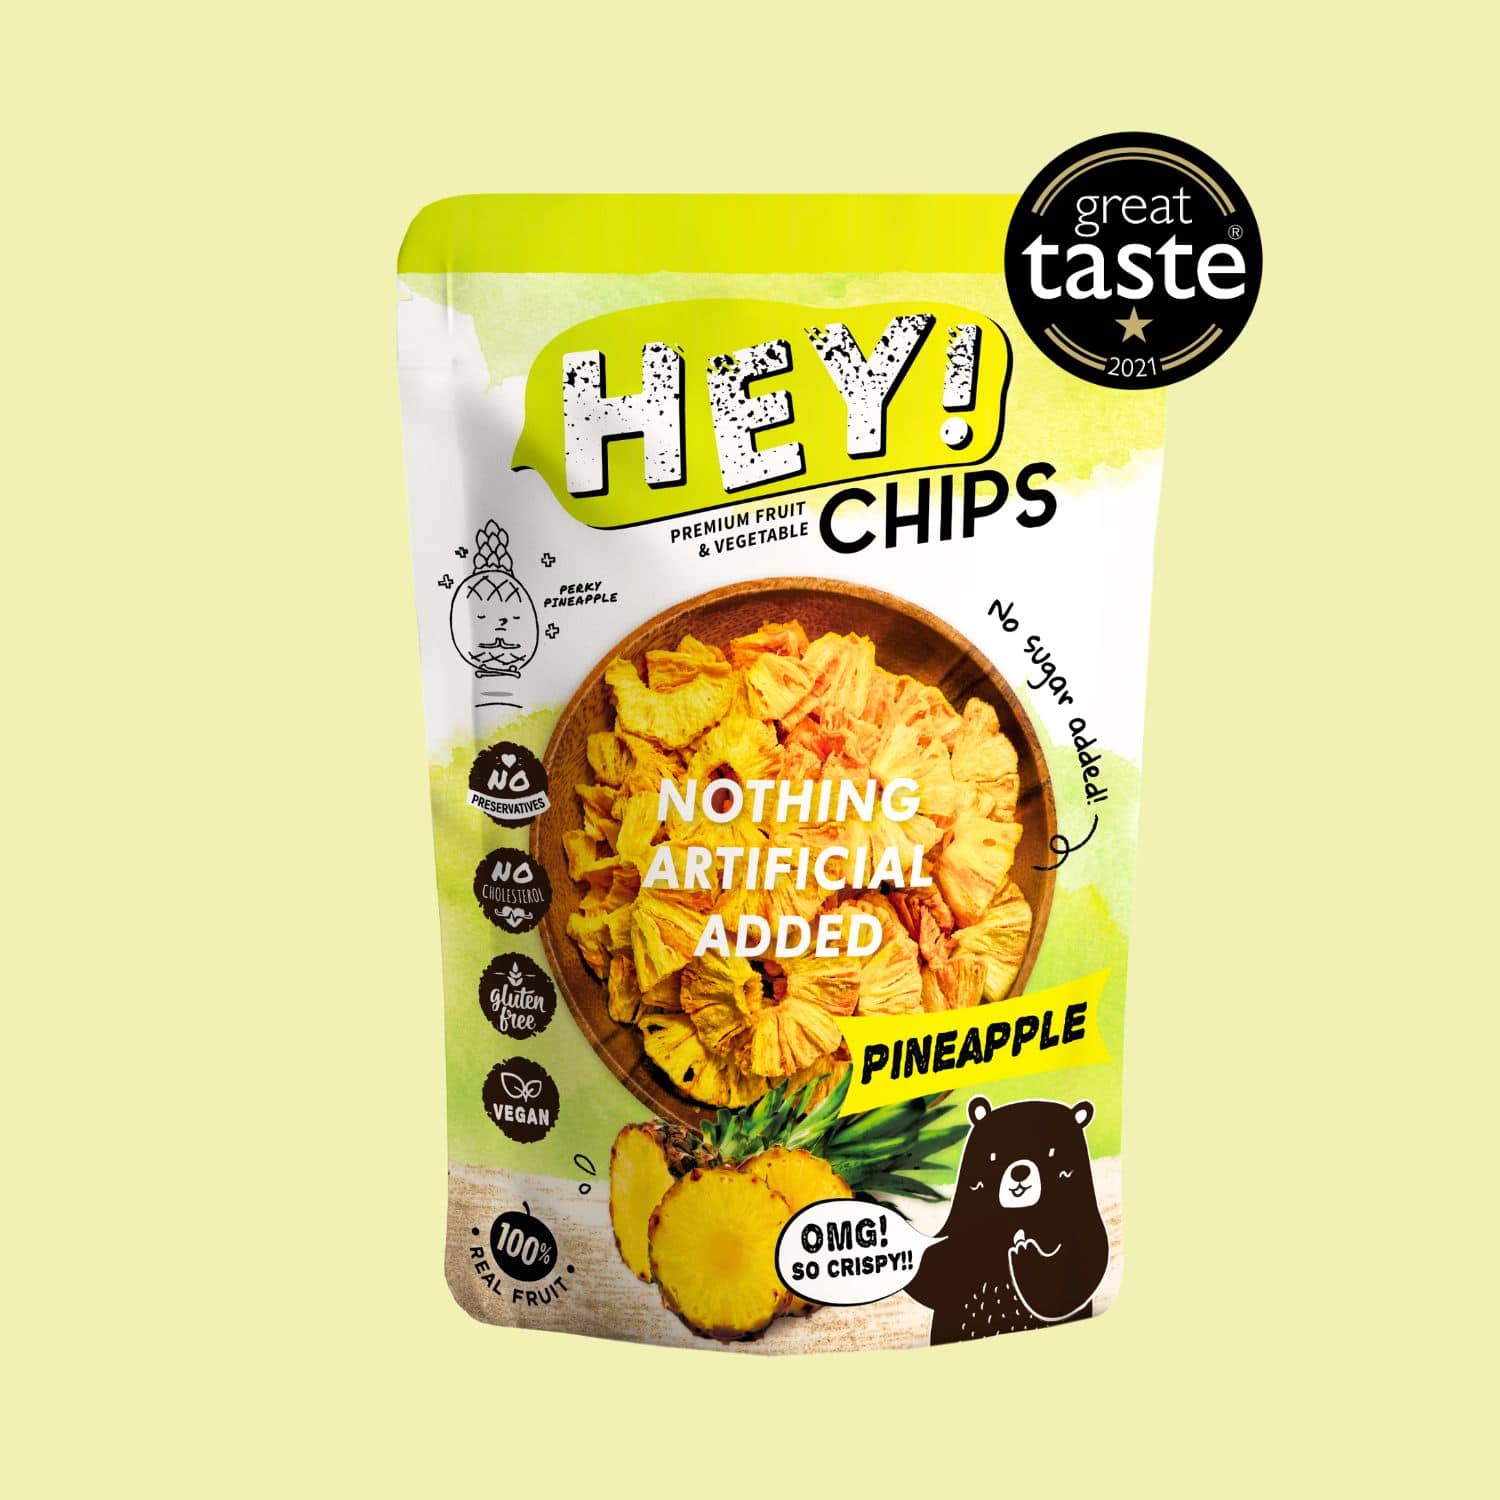 100% Natural Hey! Chips Pineapple which is Gluten-Free, Halal-Certified, Vegetarian, Vegan, Dairy-free